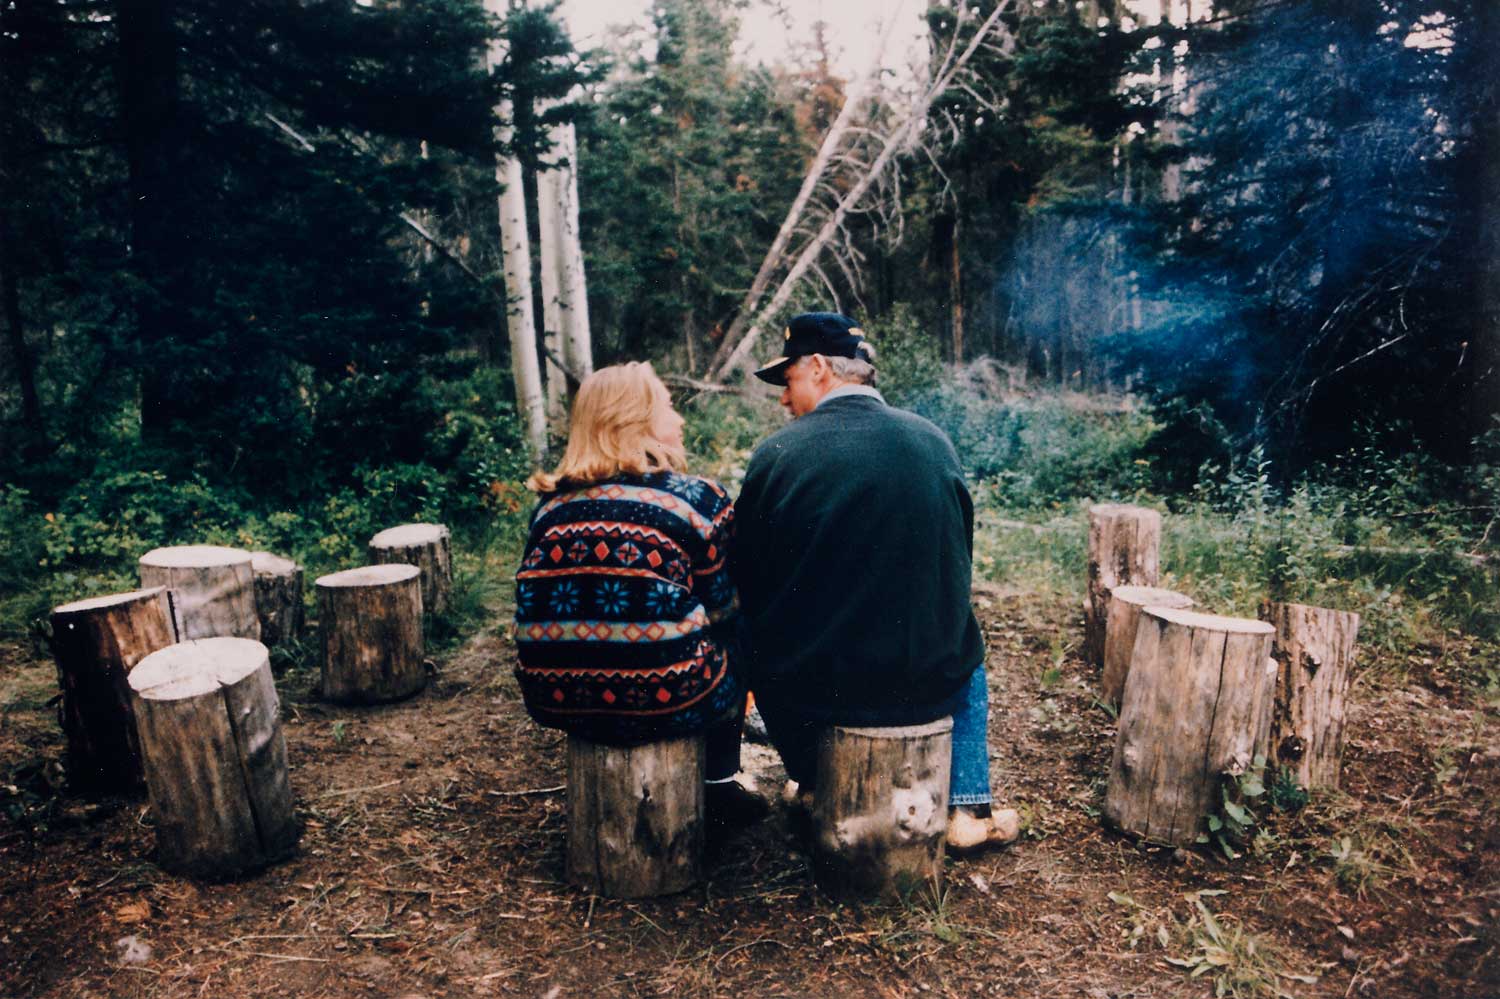 Rear view of Pres. Bill Clinton and First Lady Hillary Rodham Clinton wearing casual clothes and sitting on tree stumps while on vacation.